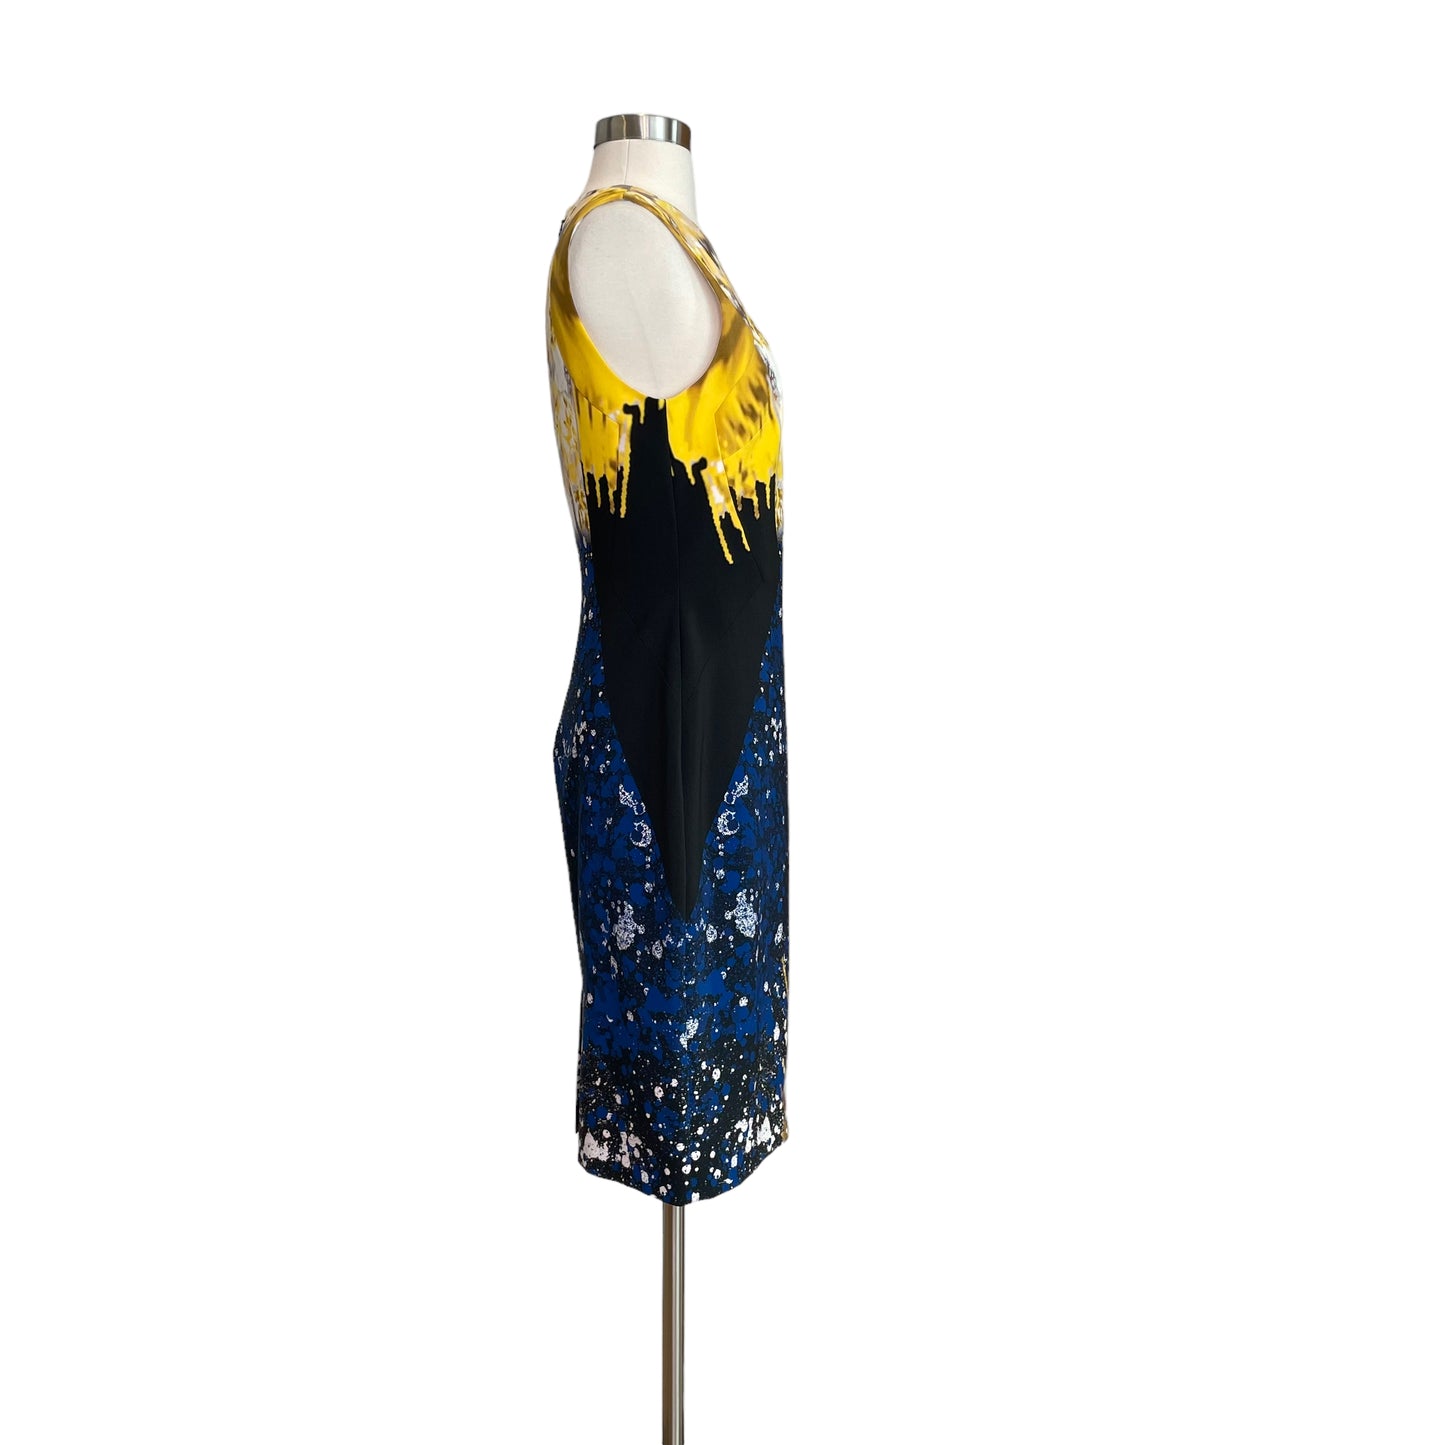 Blue and Yellow Floral Print Dress - 8